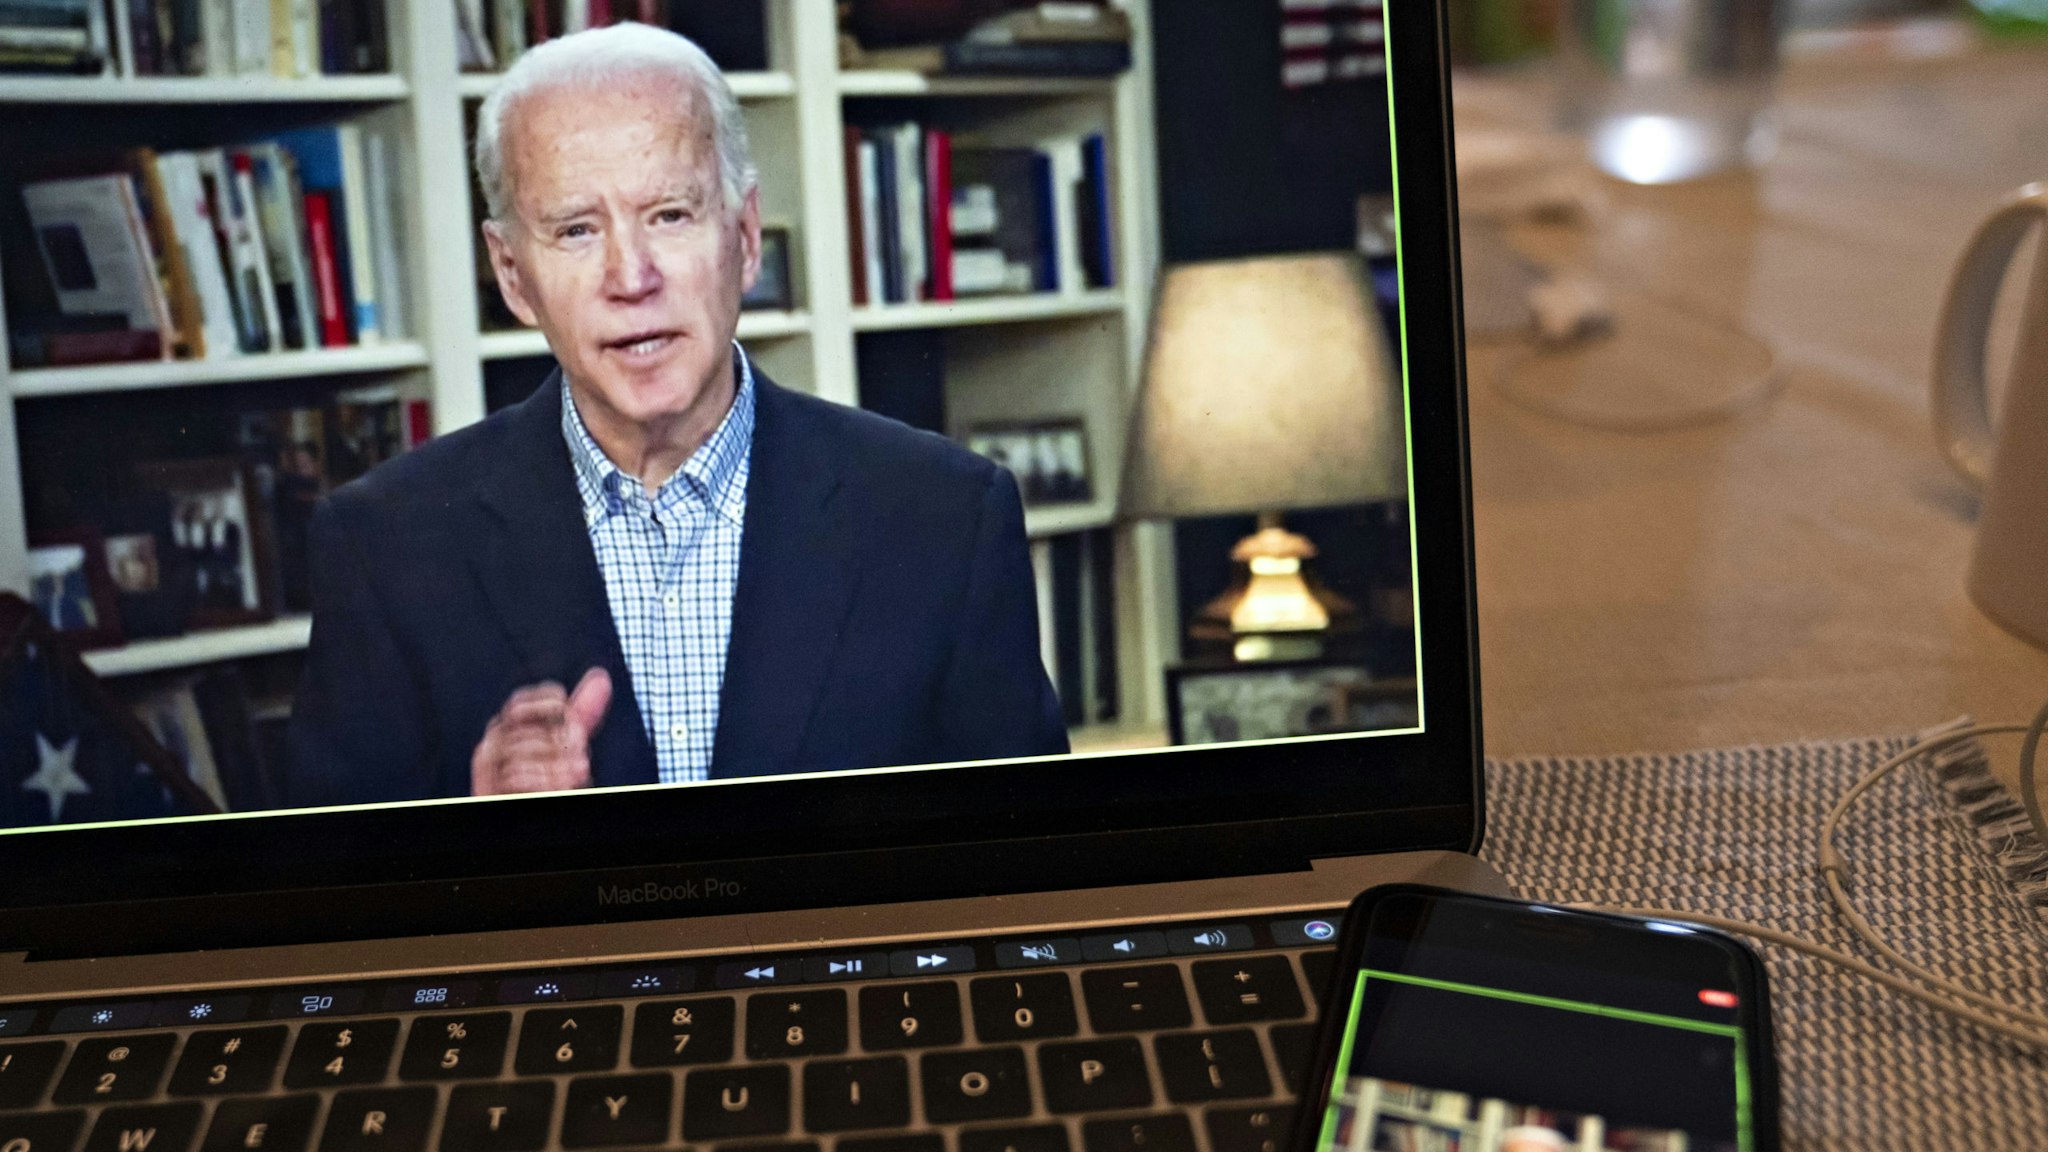 Former Vice President Joe Biden, 2020 Democratic presidential candidate, speaks during a virtual press briefing on a laptop computer in this arranged photograph in Arlington, Virginia, U.S., on Wednesday, March 25, 2020. During the livestreamed news conference today, Biden said he didn't see the need for another debate, which the Democratic National Committee had previously said would happen sometime in April. Photographer: Andrew Harrer/Bloomberg via Getty Images